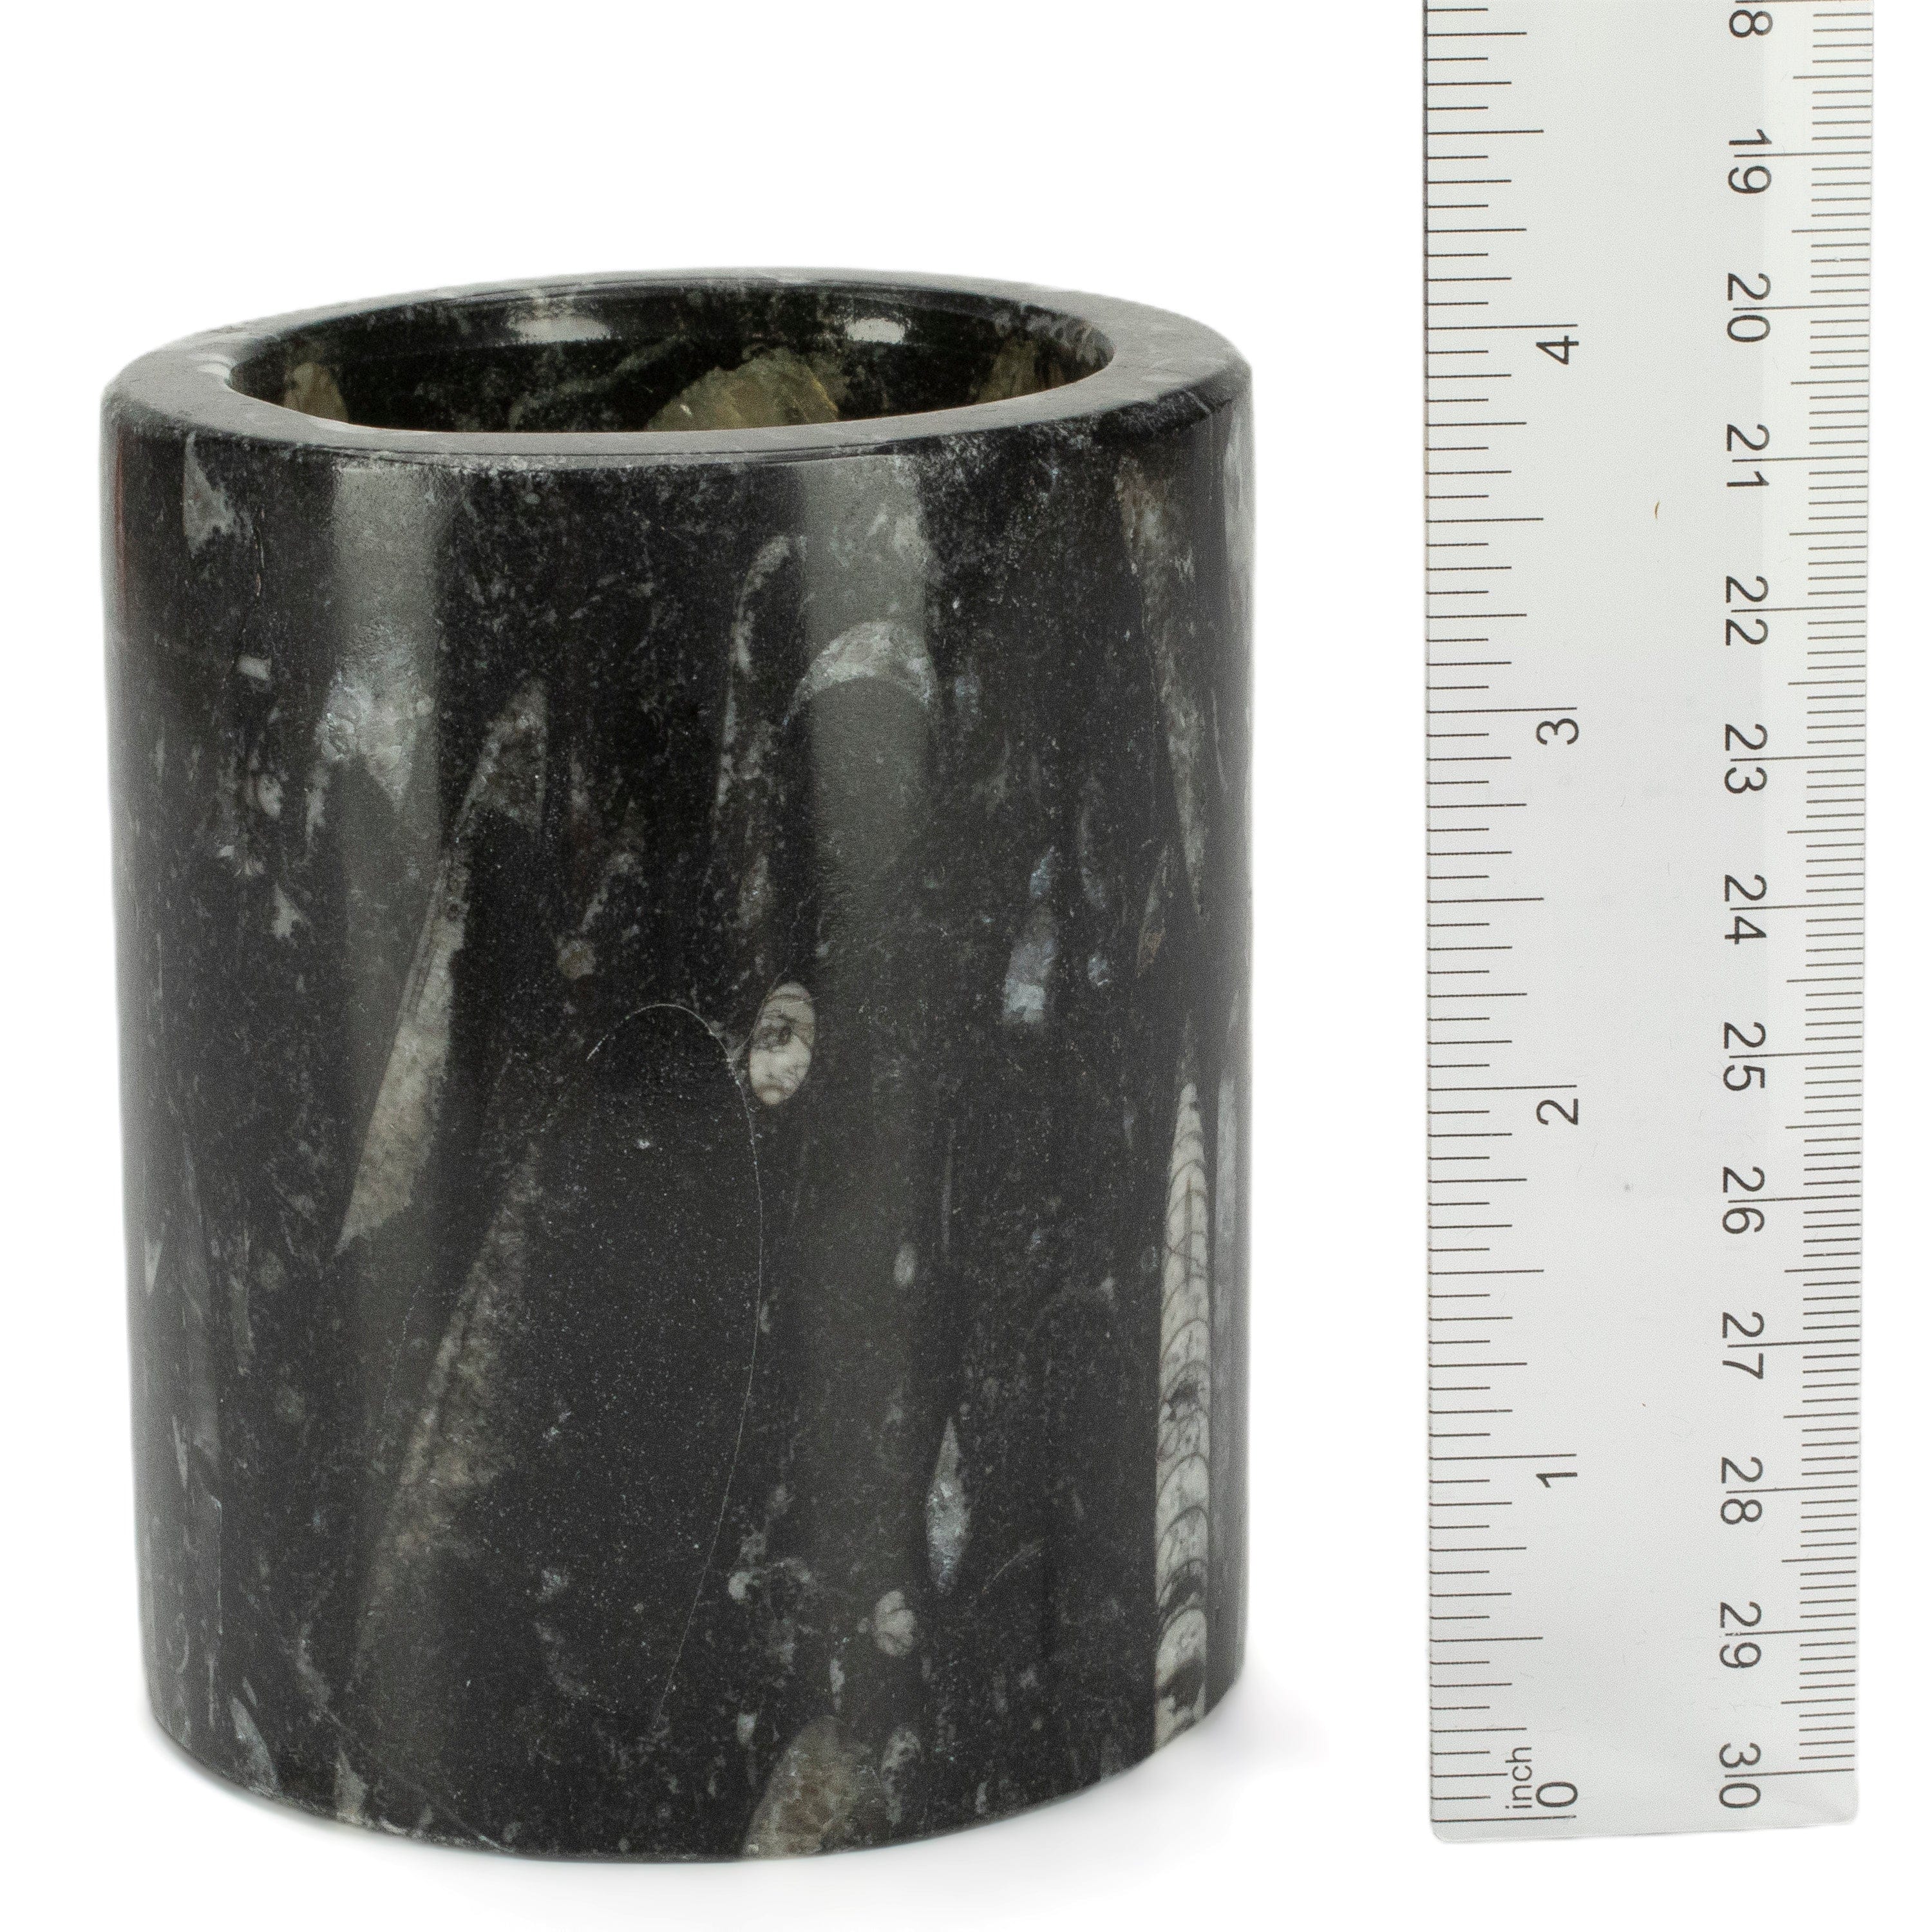 Kalifano Fossils & Minerals Black Orthoceras Cup from Morocco - 4" CORO120-BK